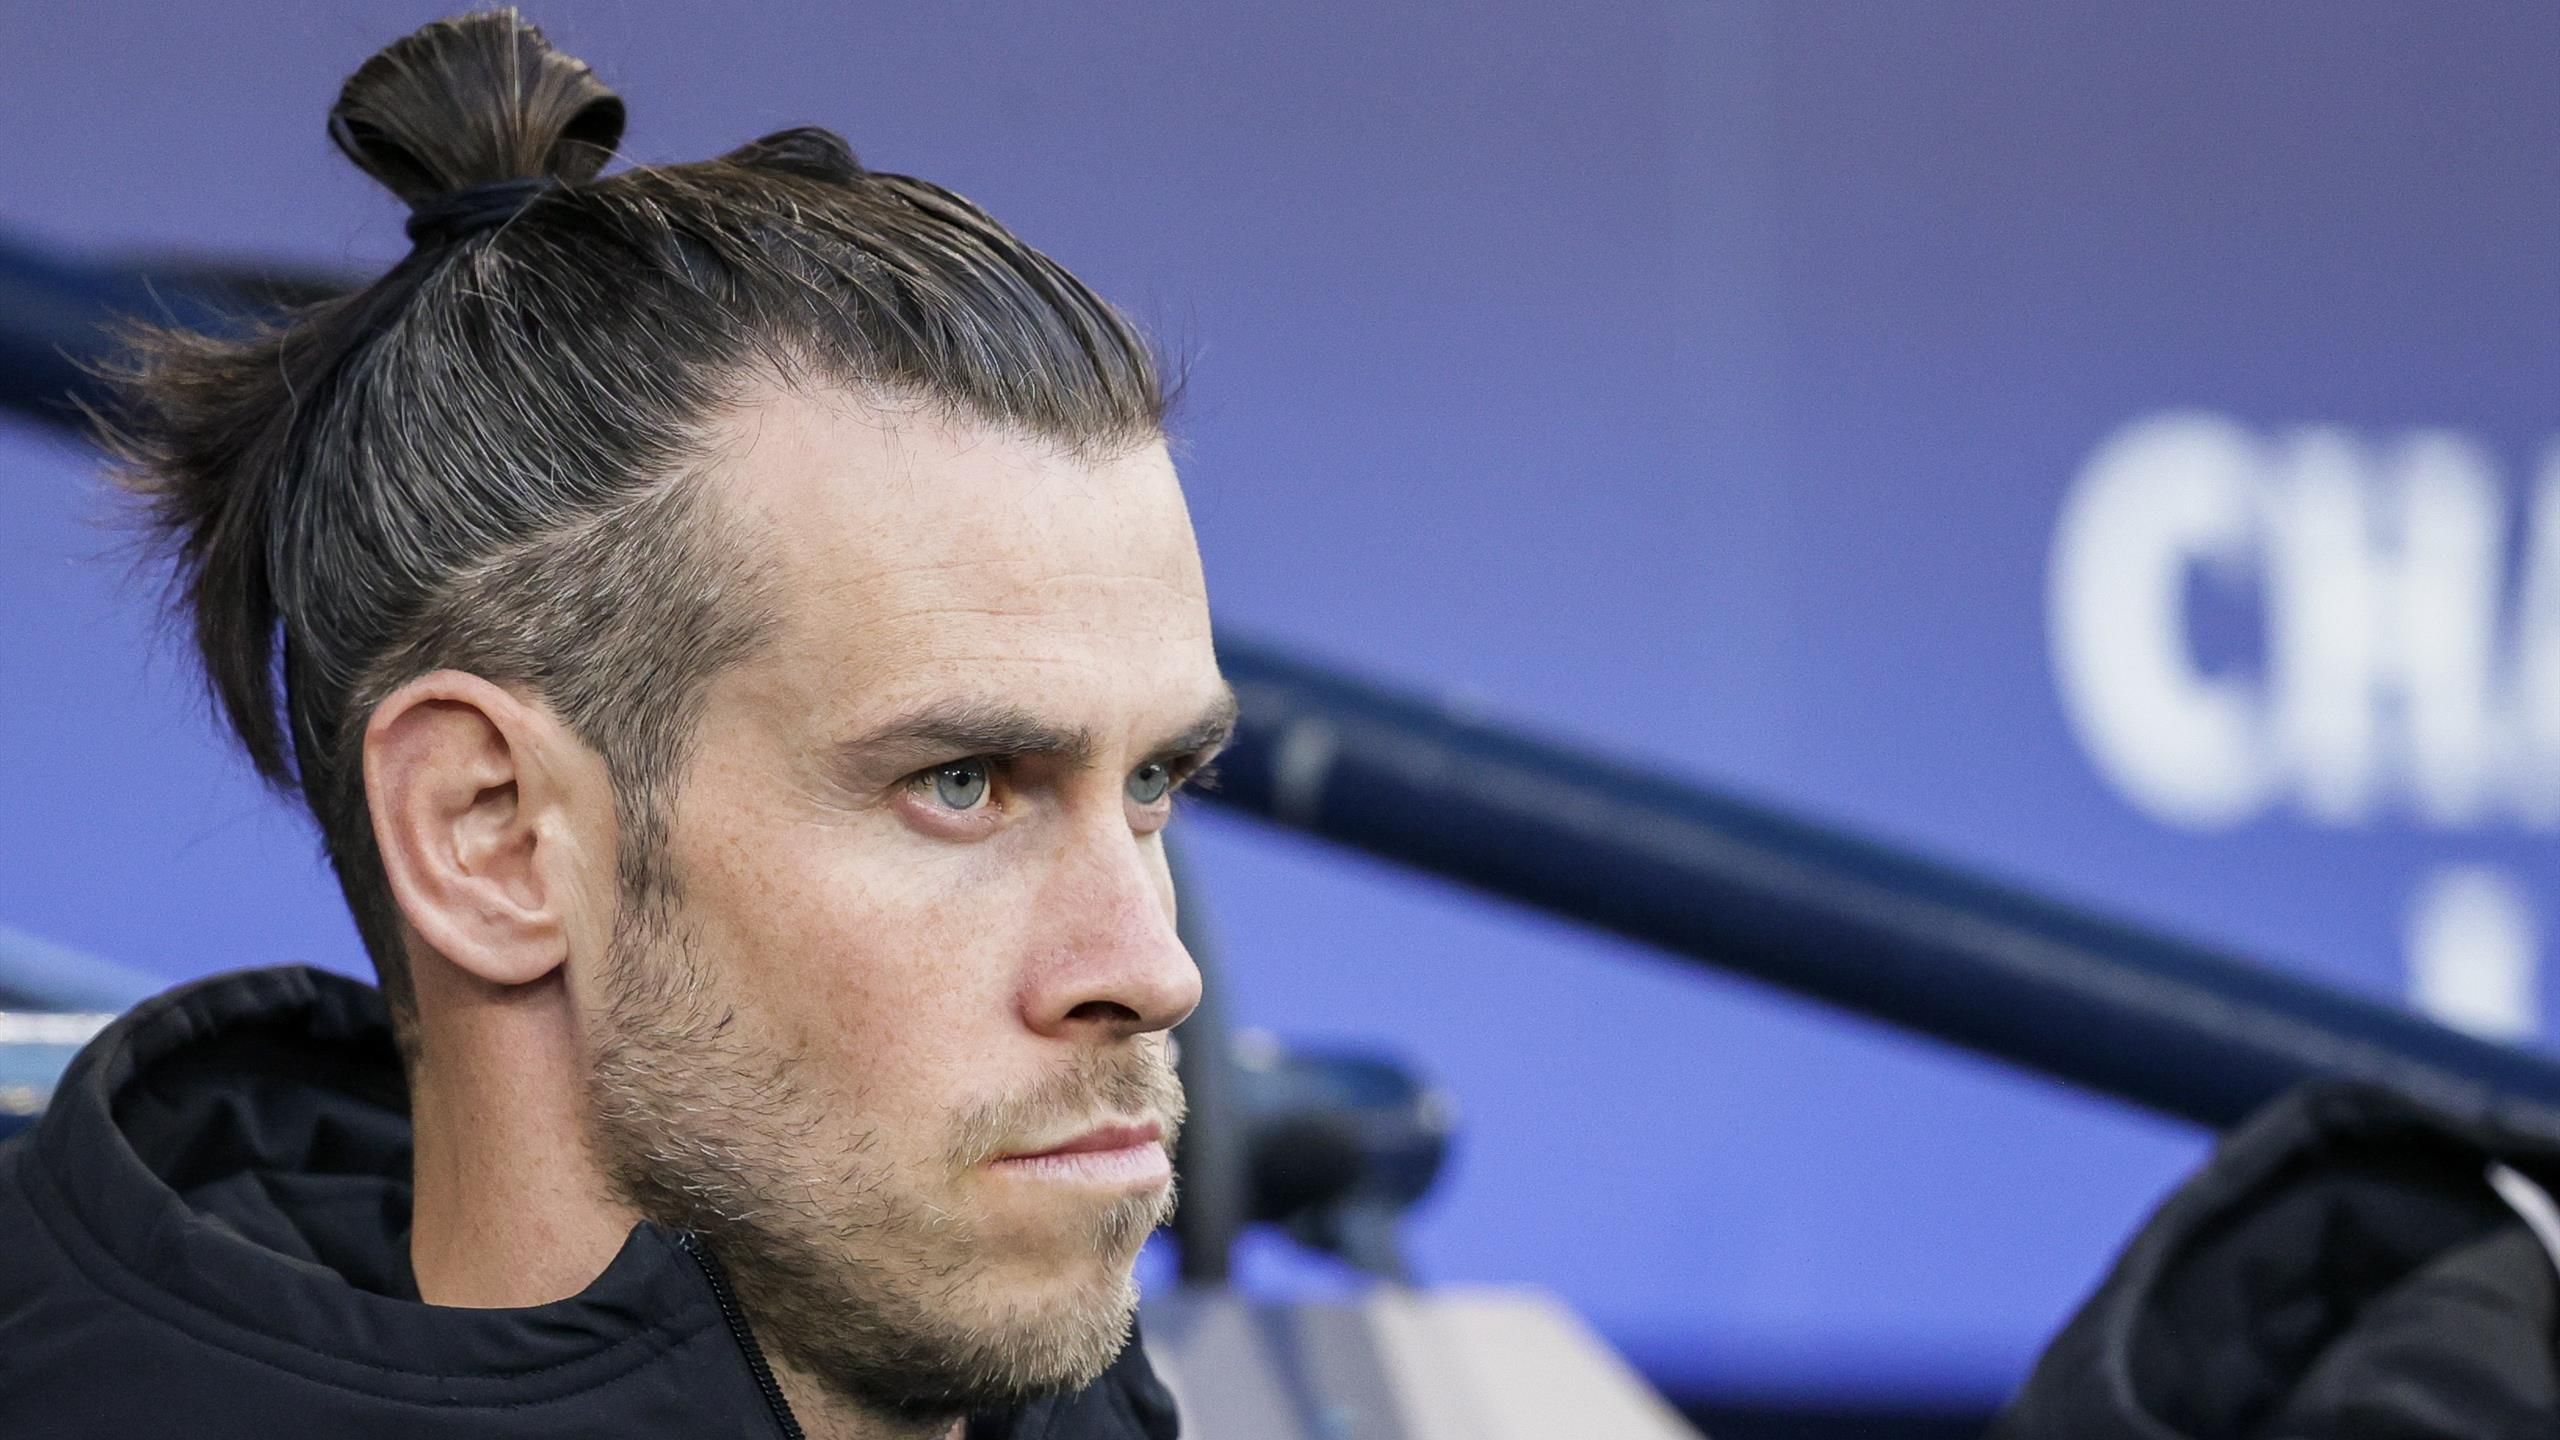 Wales international Gareth Bale wants to stay in Madrid despite Getafe  rumours denial after Real Madrid exit - Eurosport